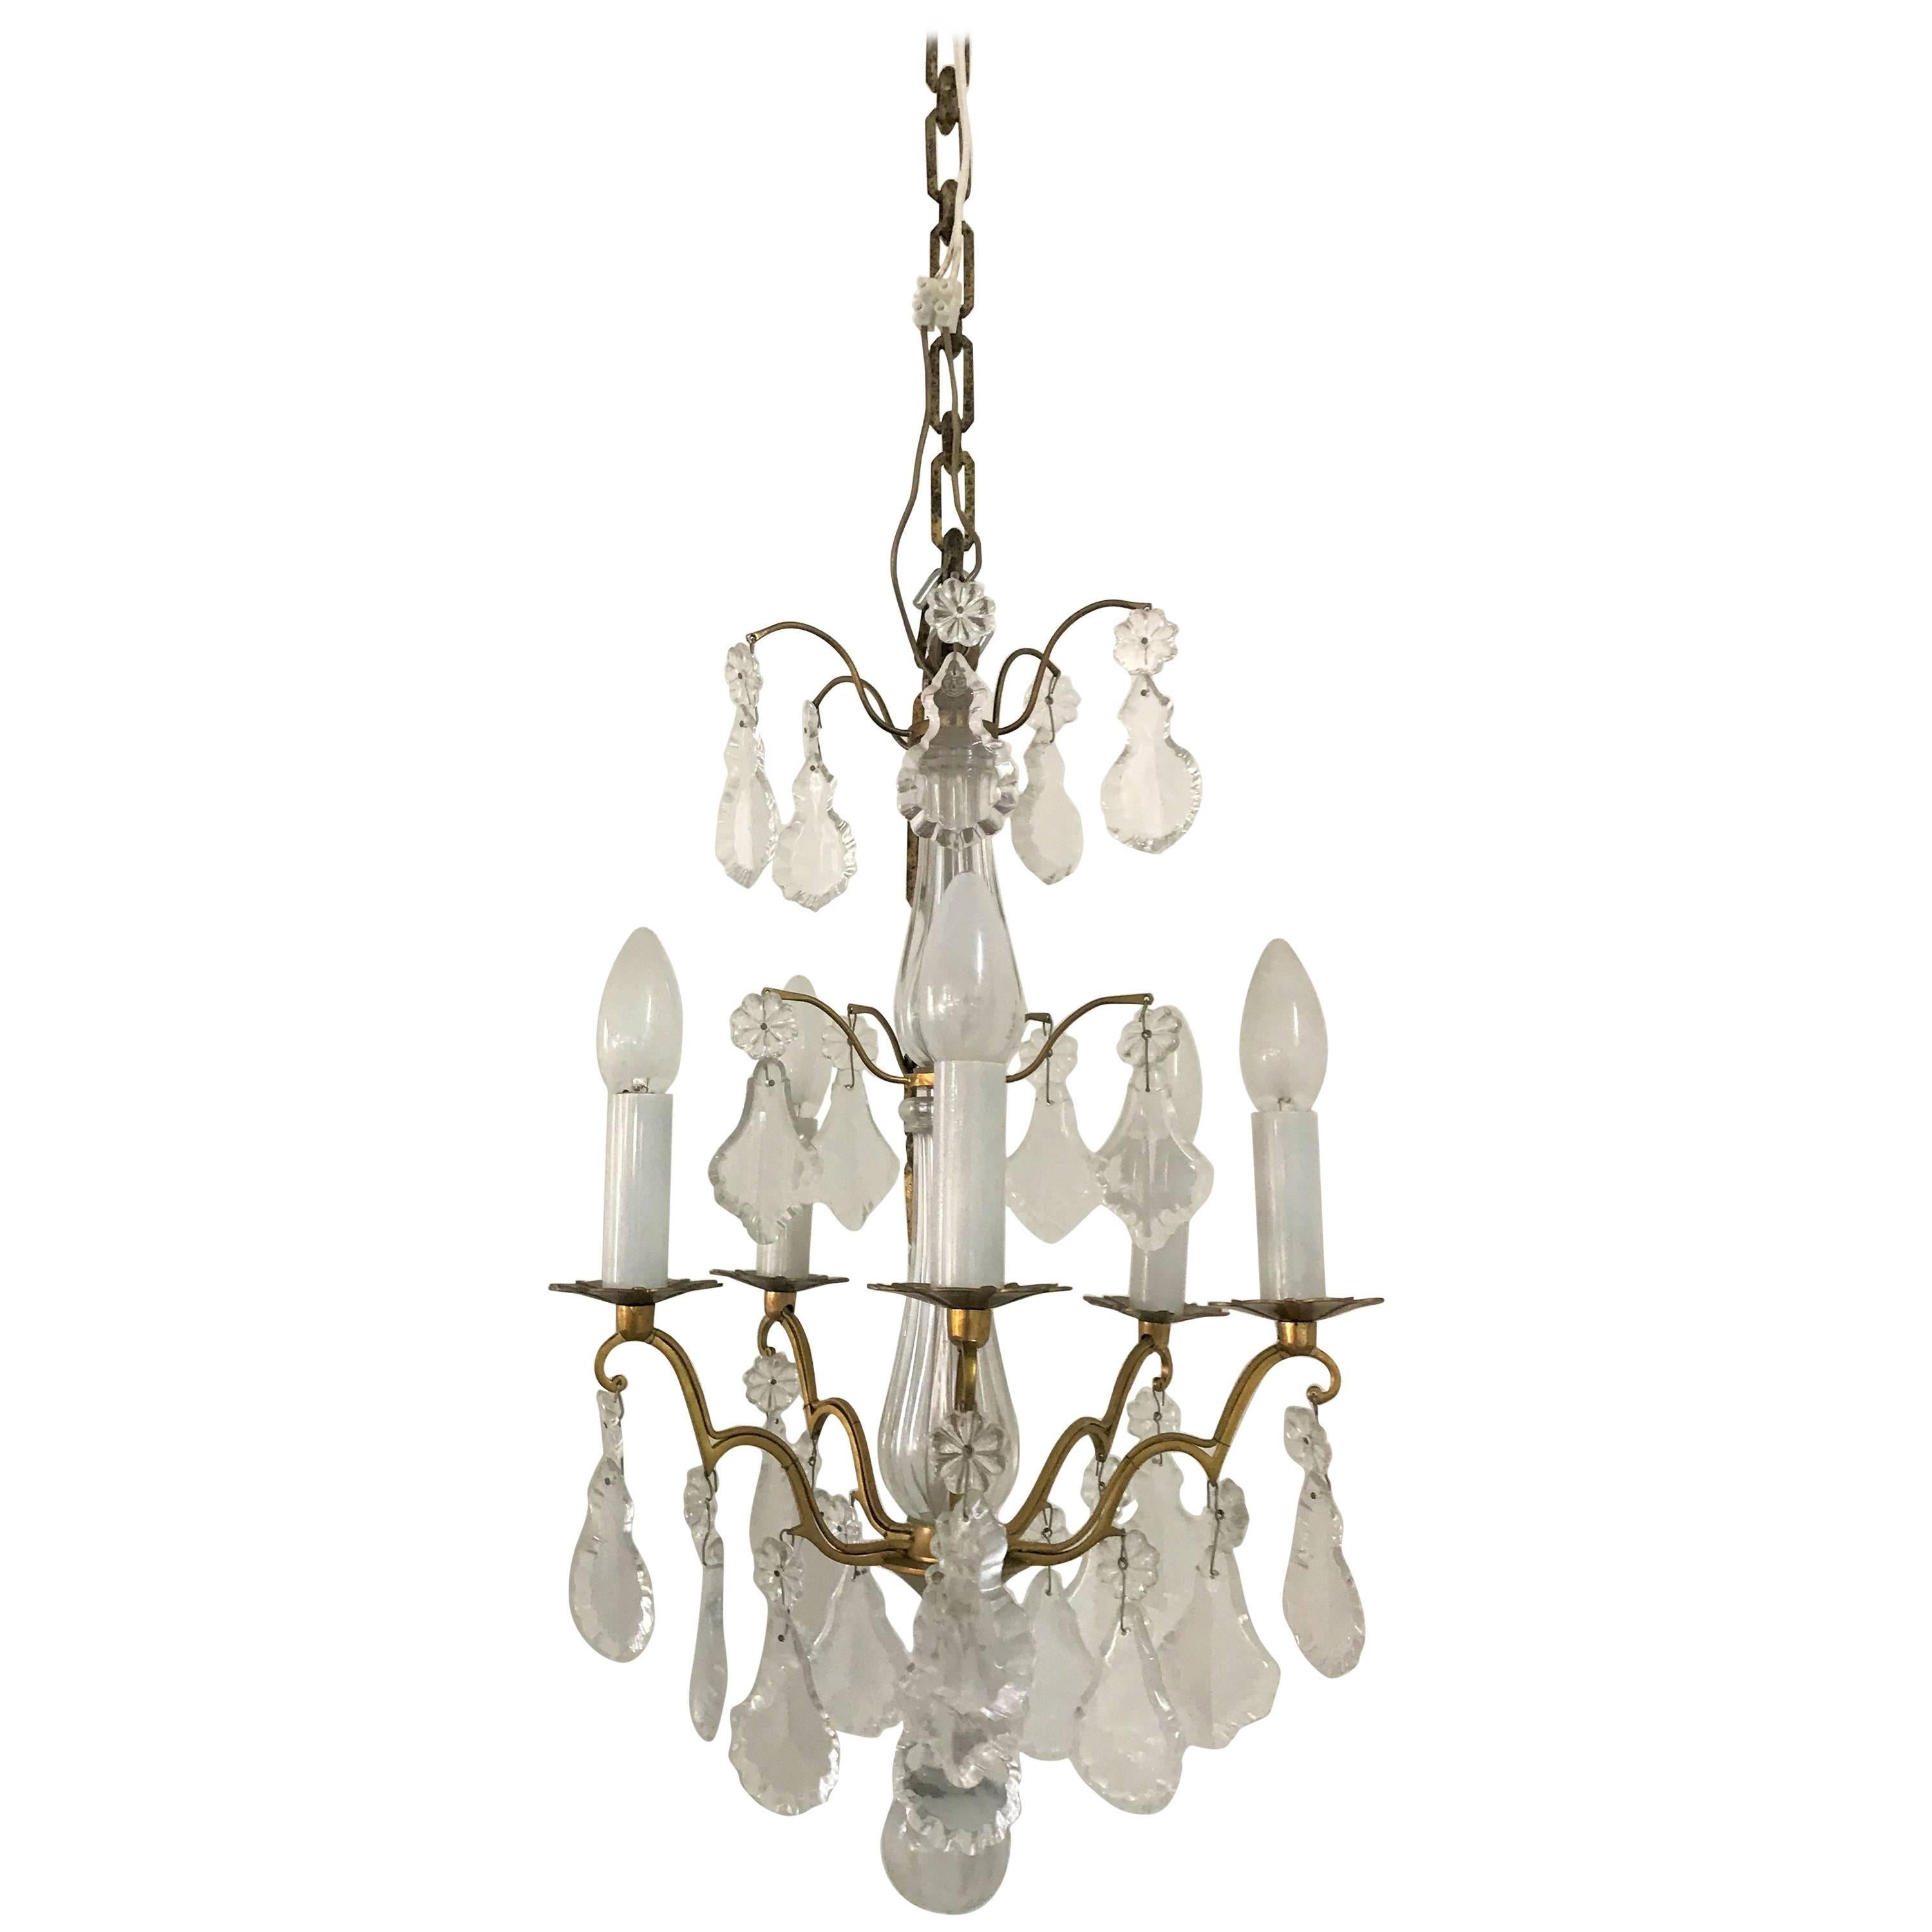 Mid-Century Modern signed Chandelier by Baccarat, France, circa 1950